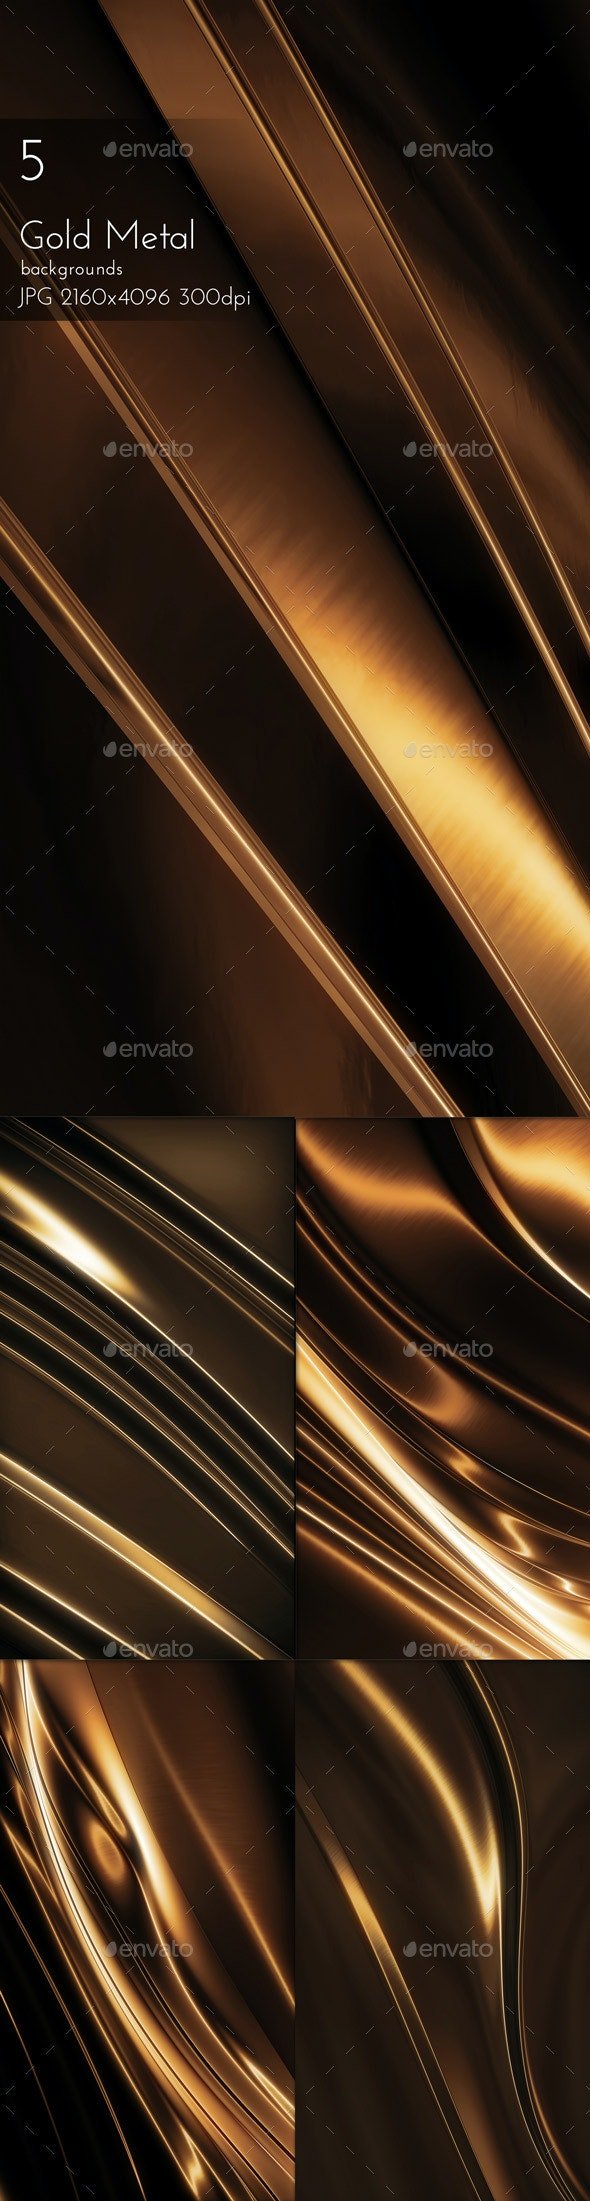 Gold Metal Background by cinema4design GraphicRiver 590x2201